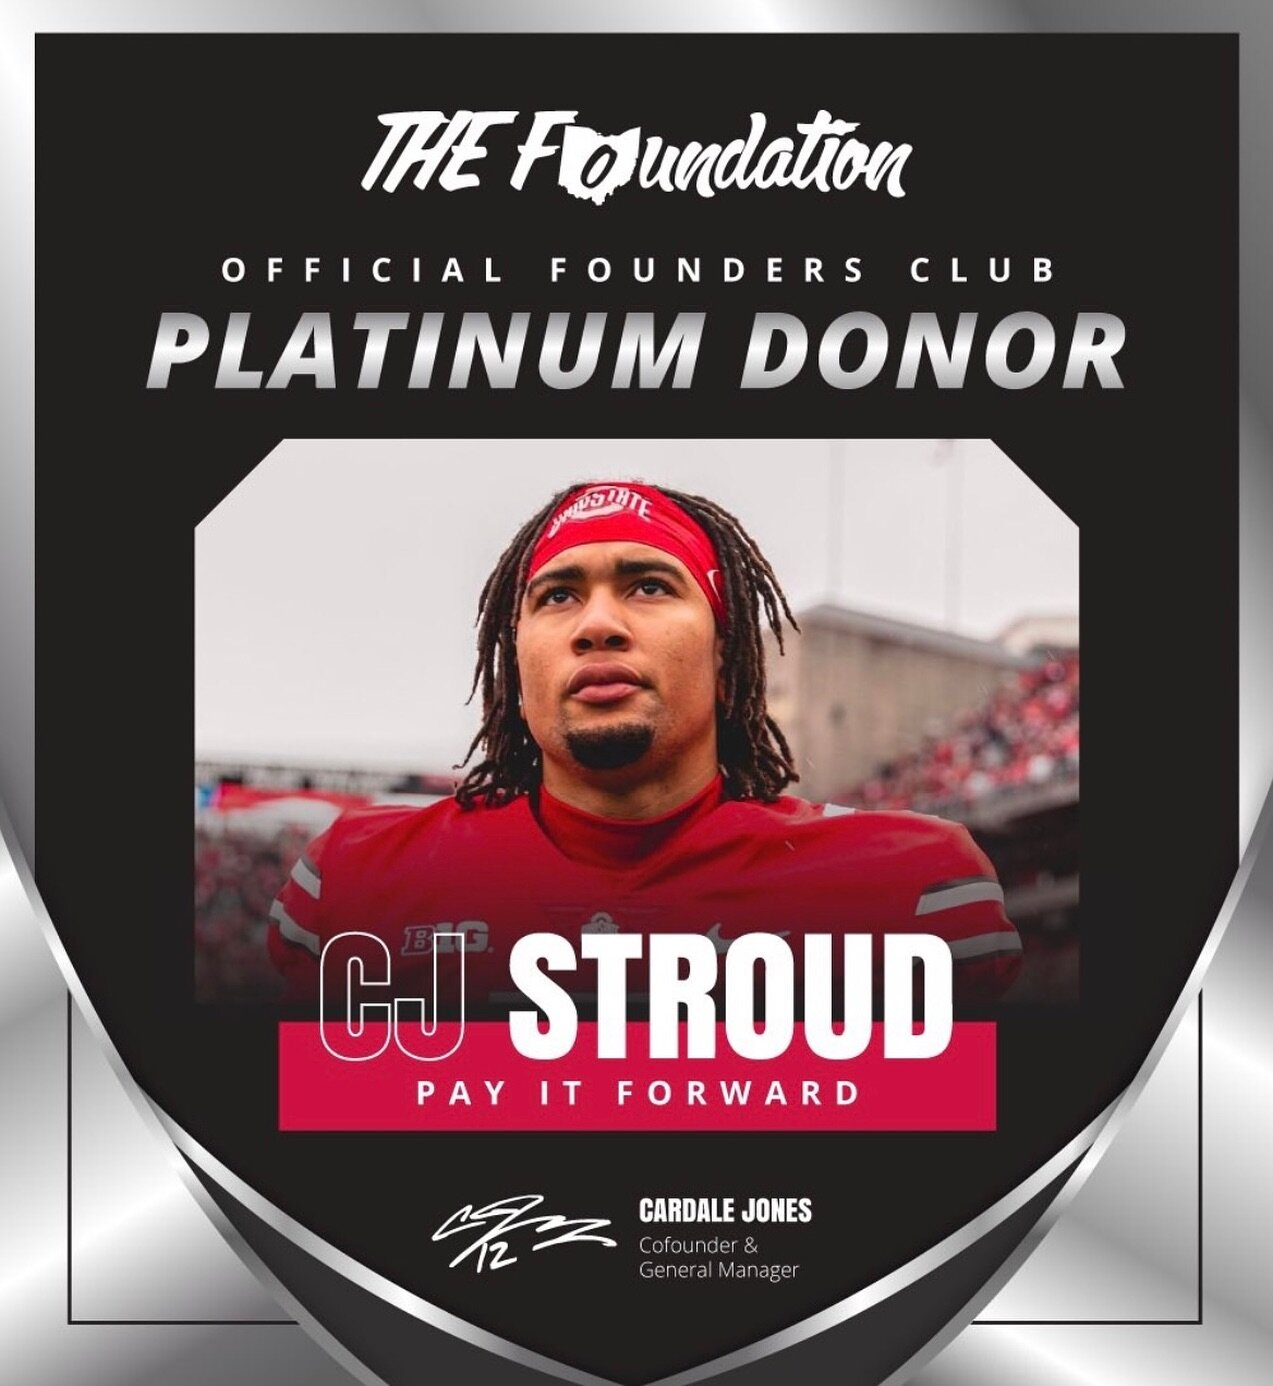 CJ Stroud makes a &ldquo;Platinum&rdquo; level donation to Ohio State Buckeyes NIL collective, &ldquo;THE Foundation&rdquo;.

To be a platinum level donor, Stroud must have given anywhere from $50-100k. Stroud is the first former student athlete part